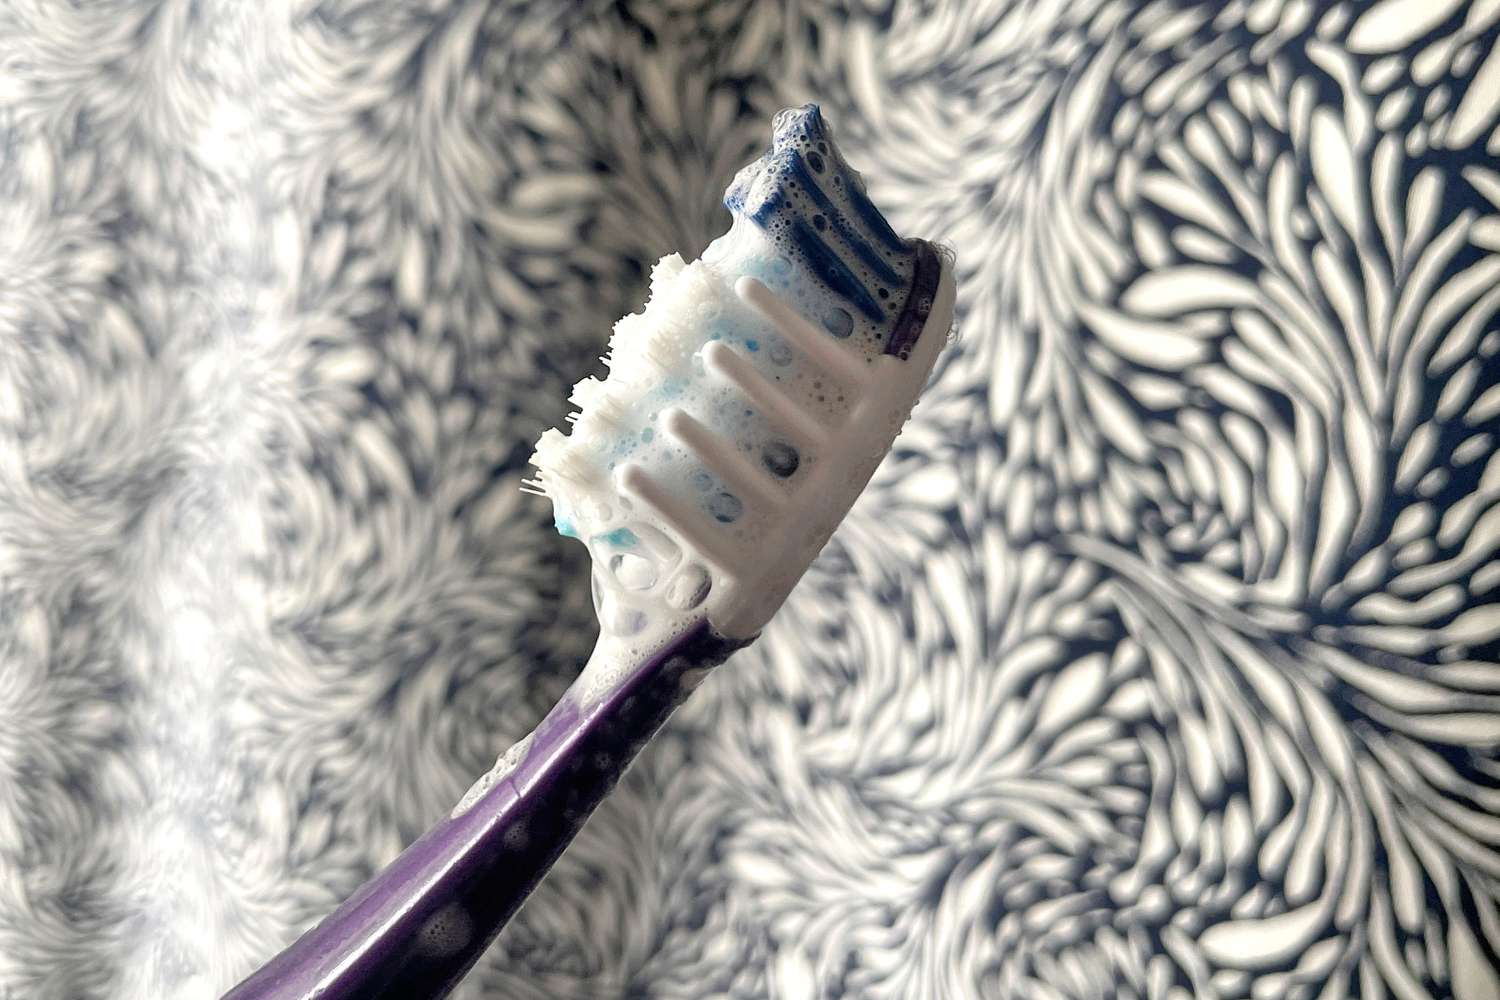 Sensodyne Extra Whitening Toothpaste lathered on a toothbrush in front of a shower curtain